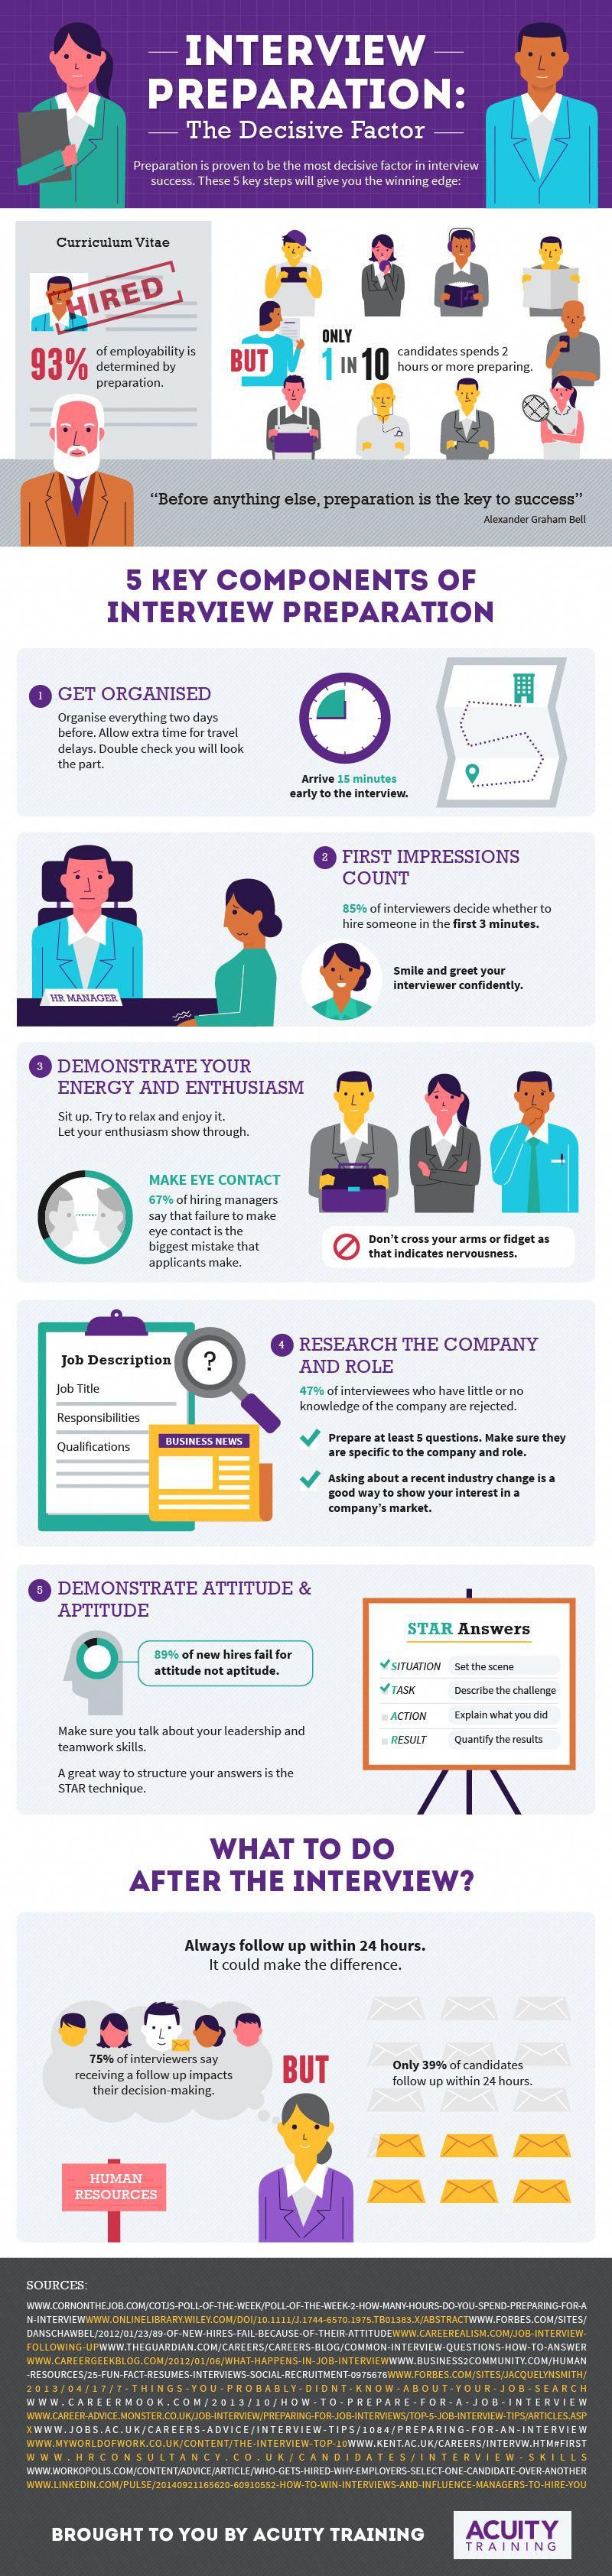 Interview Preparation: What to do before and after the interview?